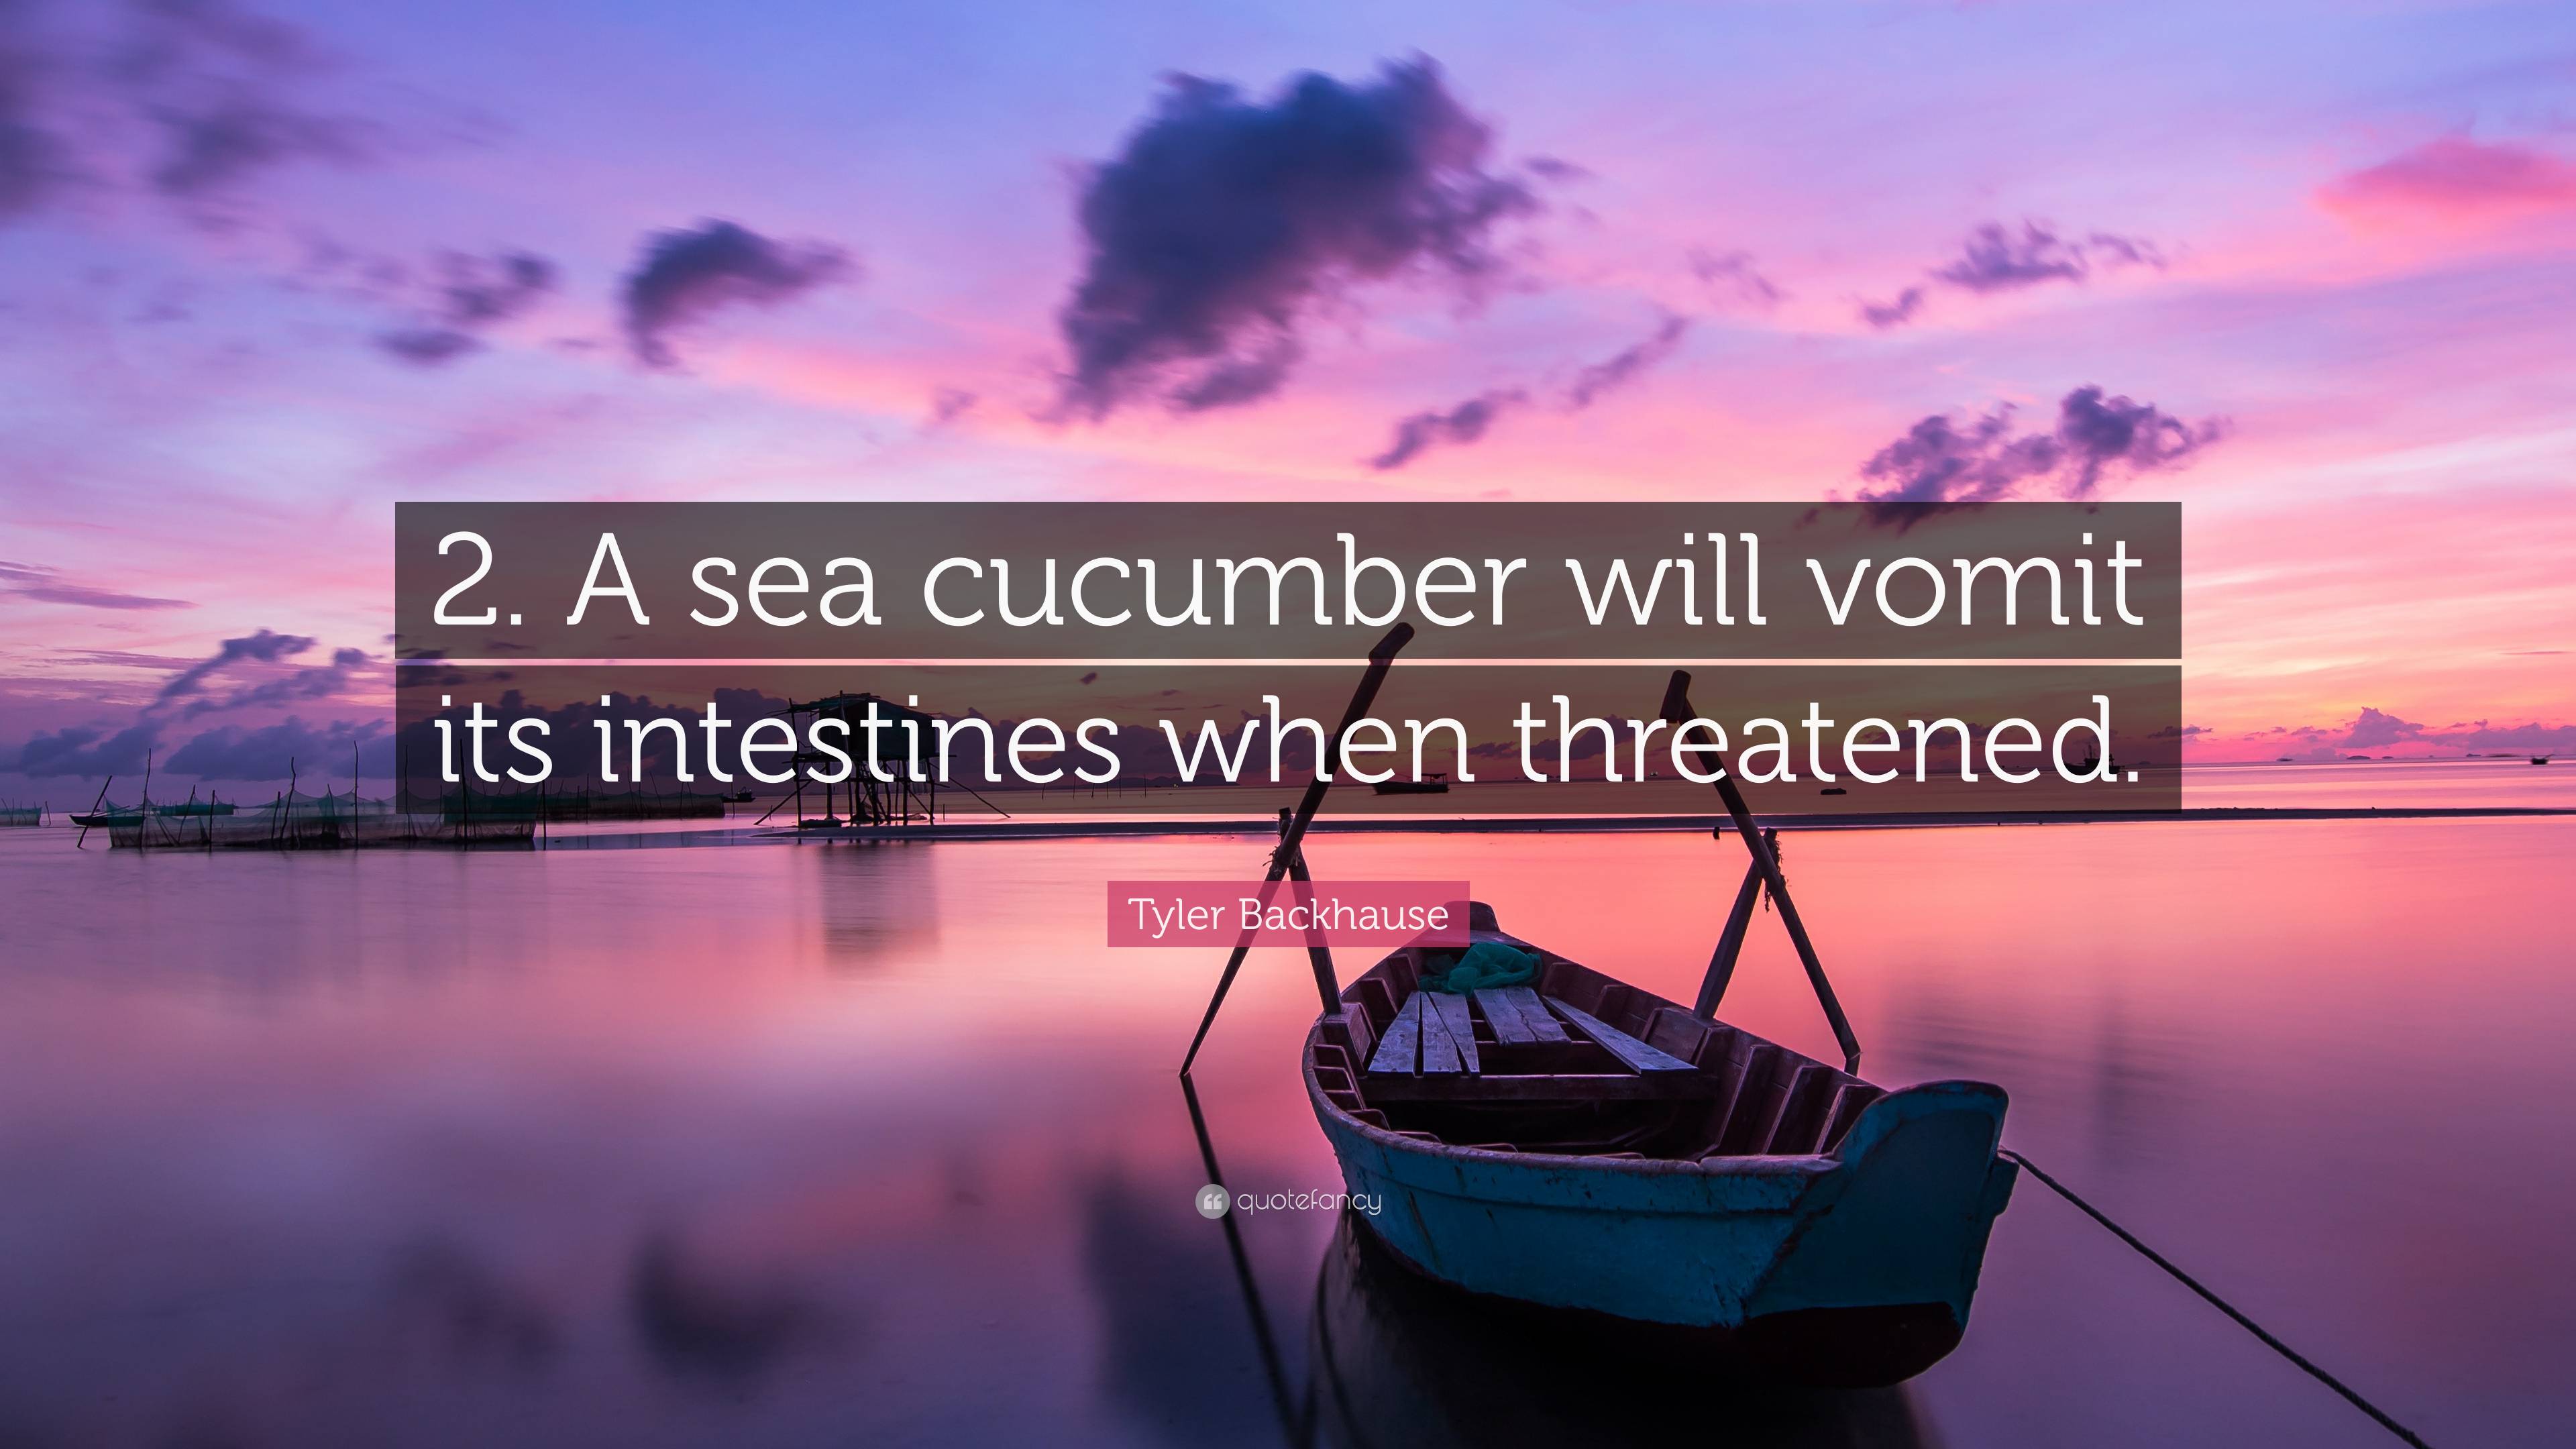 Tyler Backhause Quote: “2. A sea cucumber will vomit its intestines ...